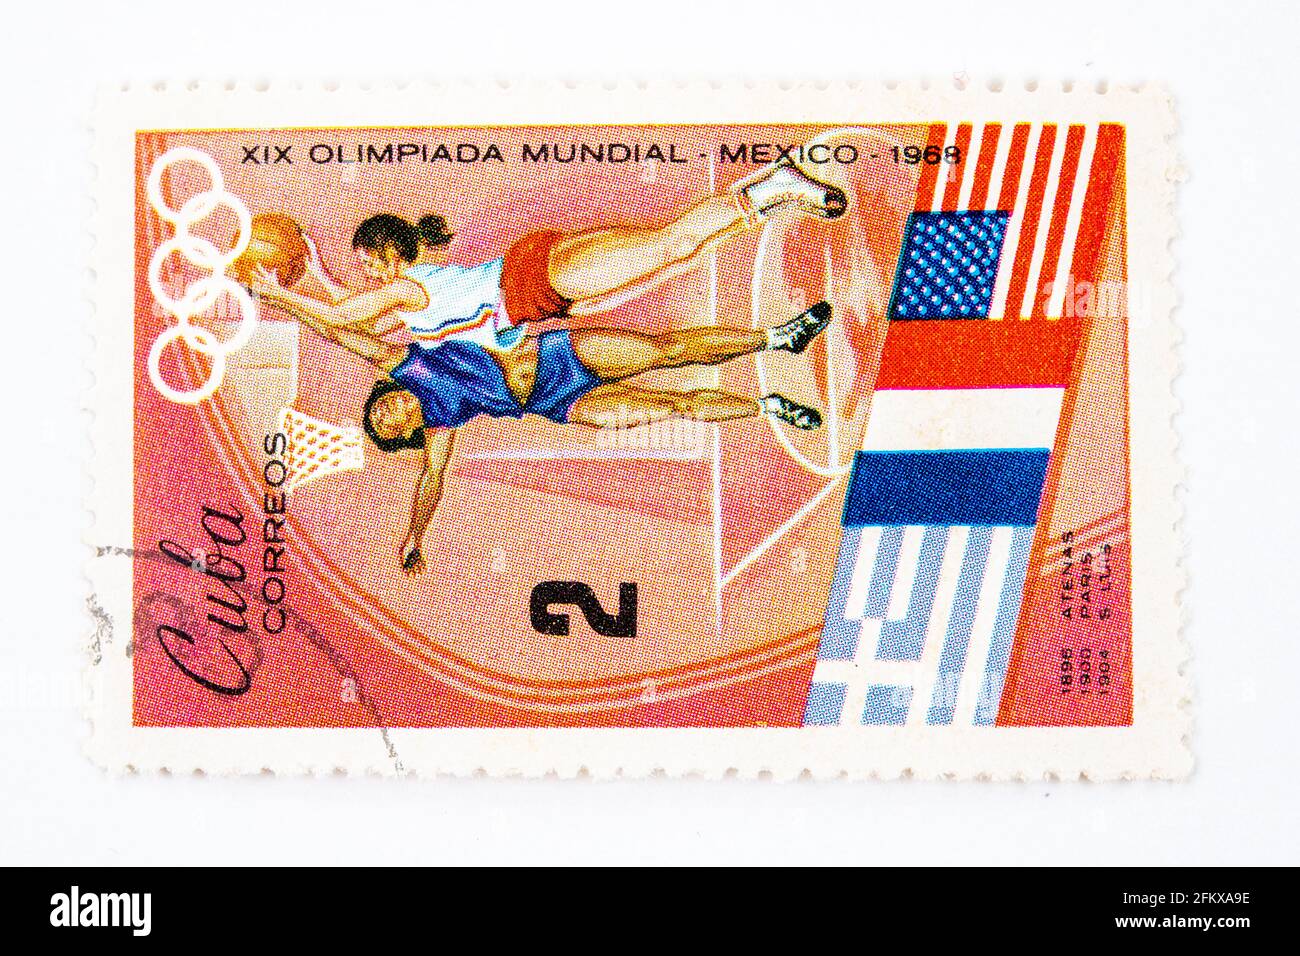 Antique 'Cuba Correos' postal stamp themed on the XIX Olympic Games in Mexico. Edition 1968 Stock Photo